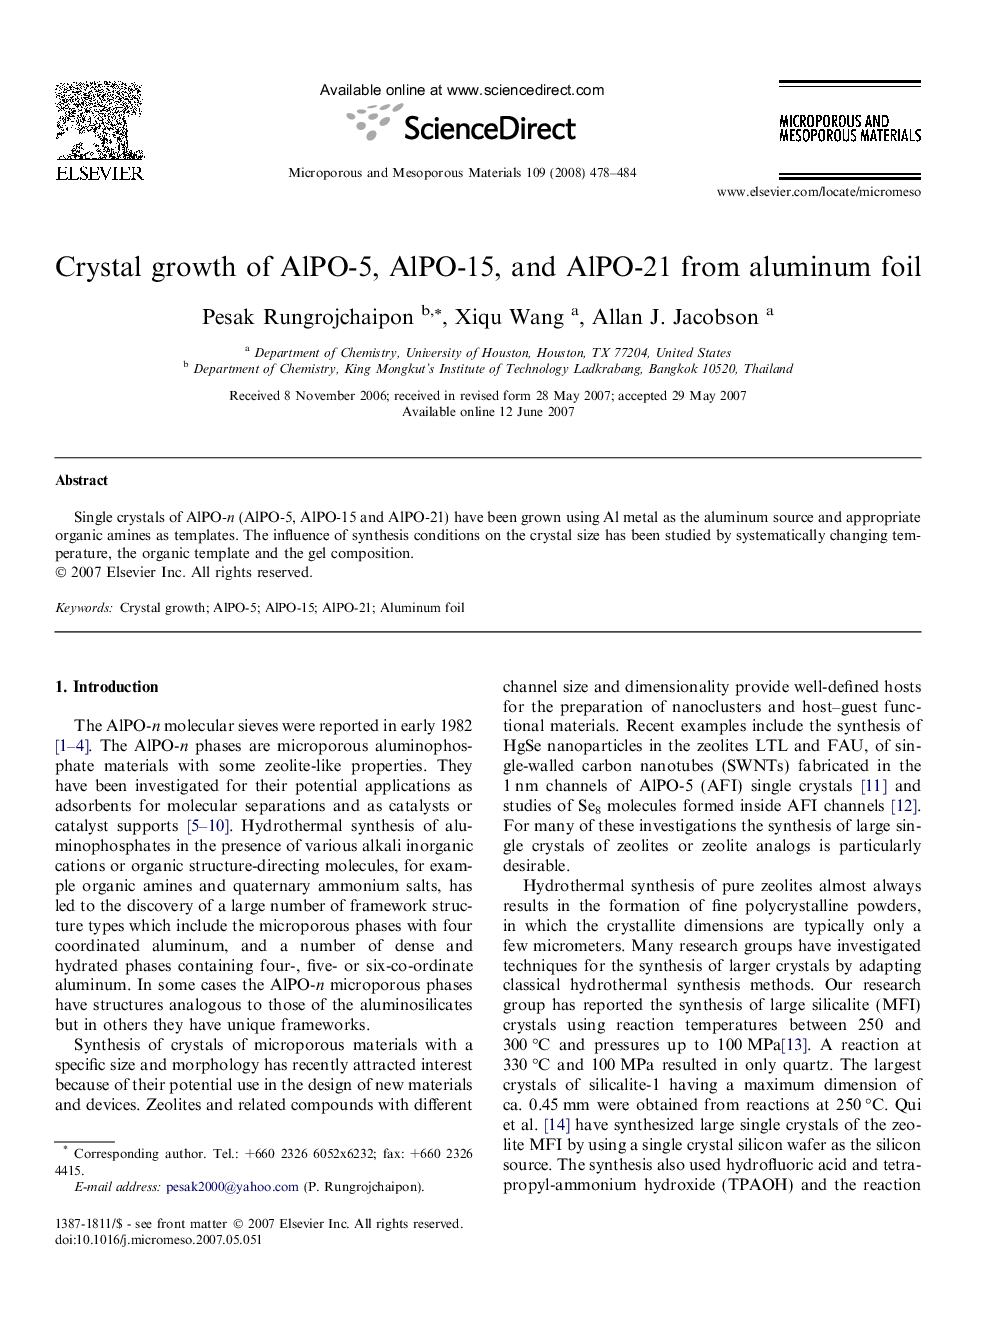 Crystal growth of AlPO-5, AlPO-15, and AlPO-21 from aluminum foil